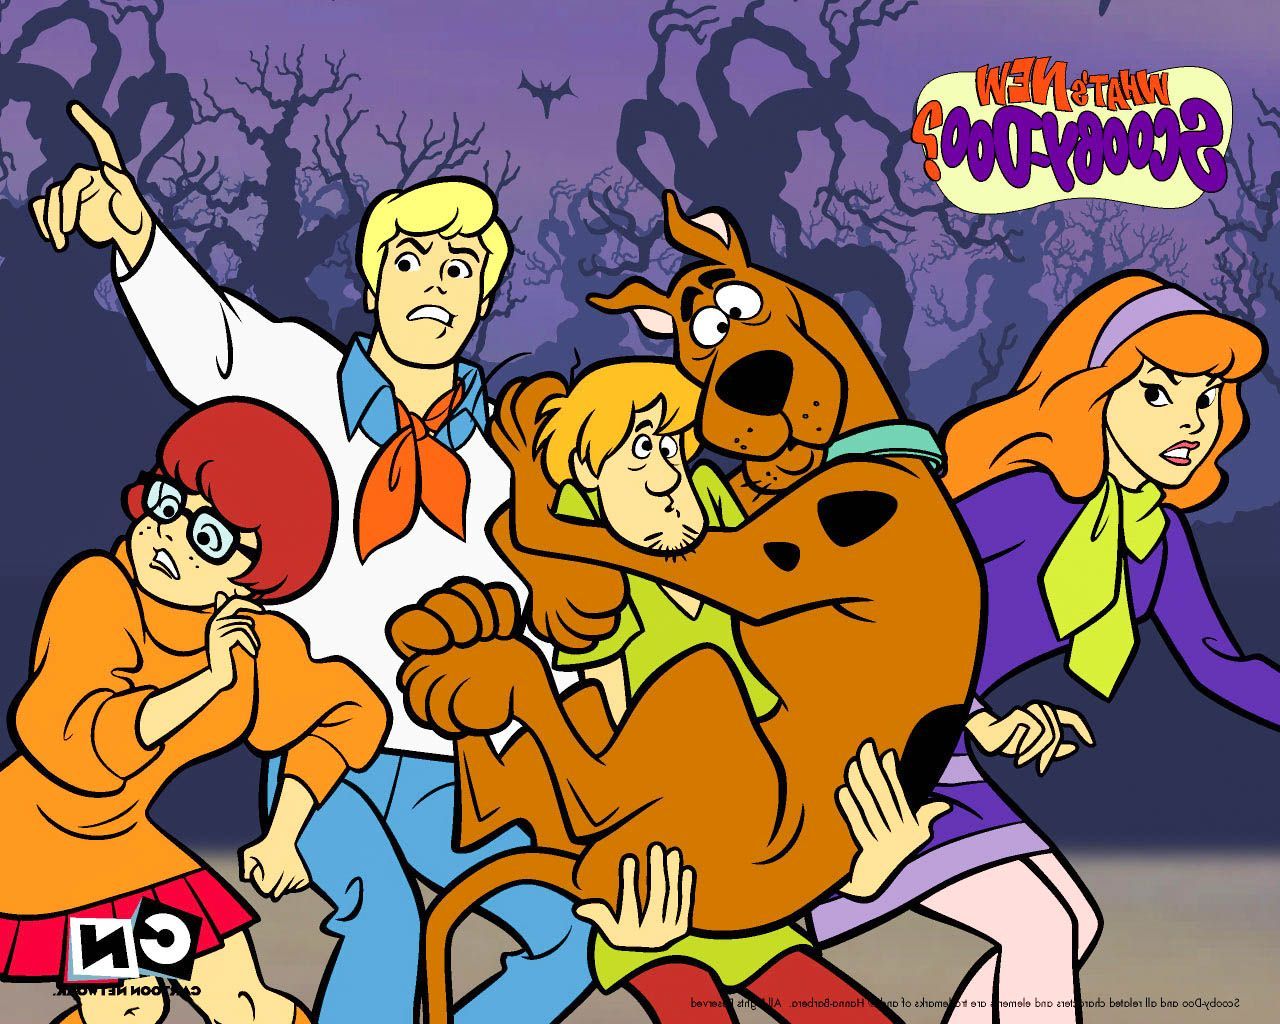 Scooby Doo Funny HD Wallpaper (High Quality) HD Wallpaper. Scooby doo picture, What's new scooby doo, New scooby doo